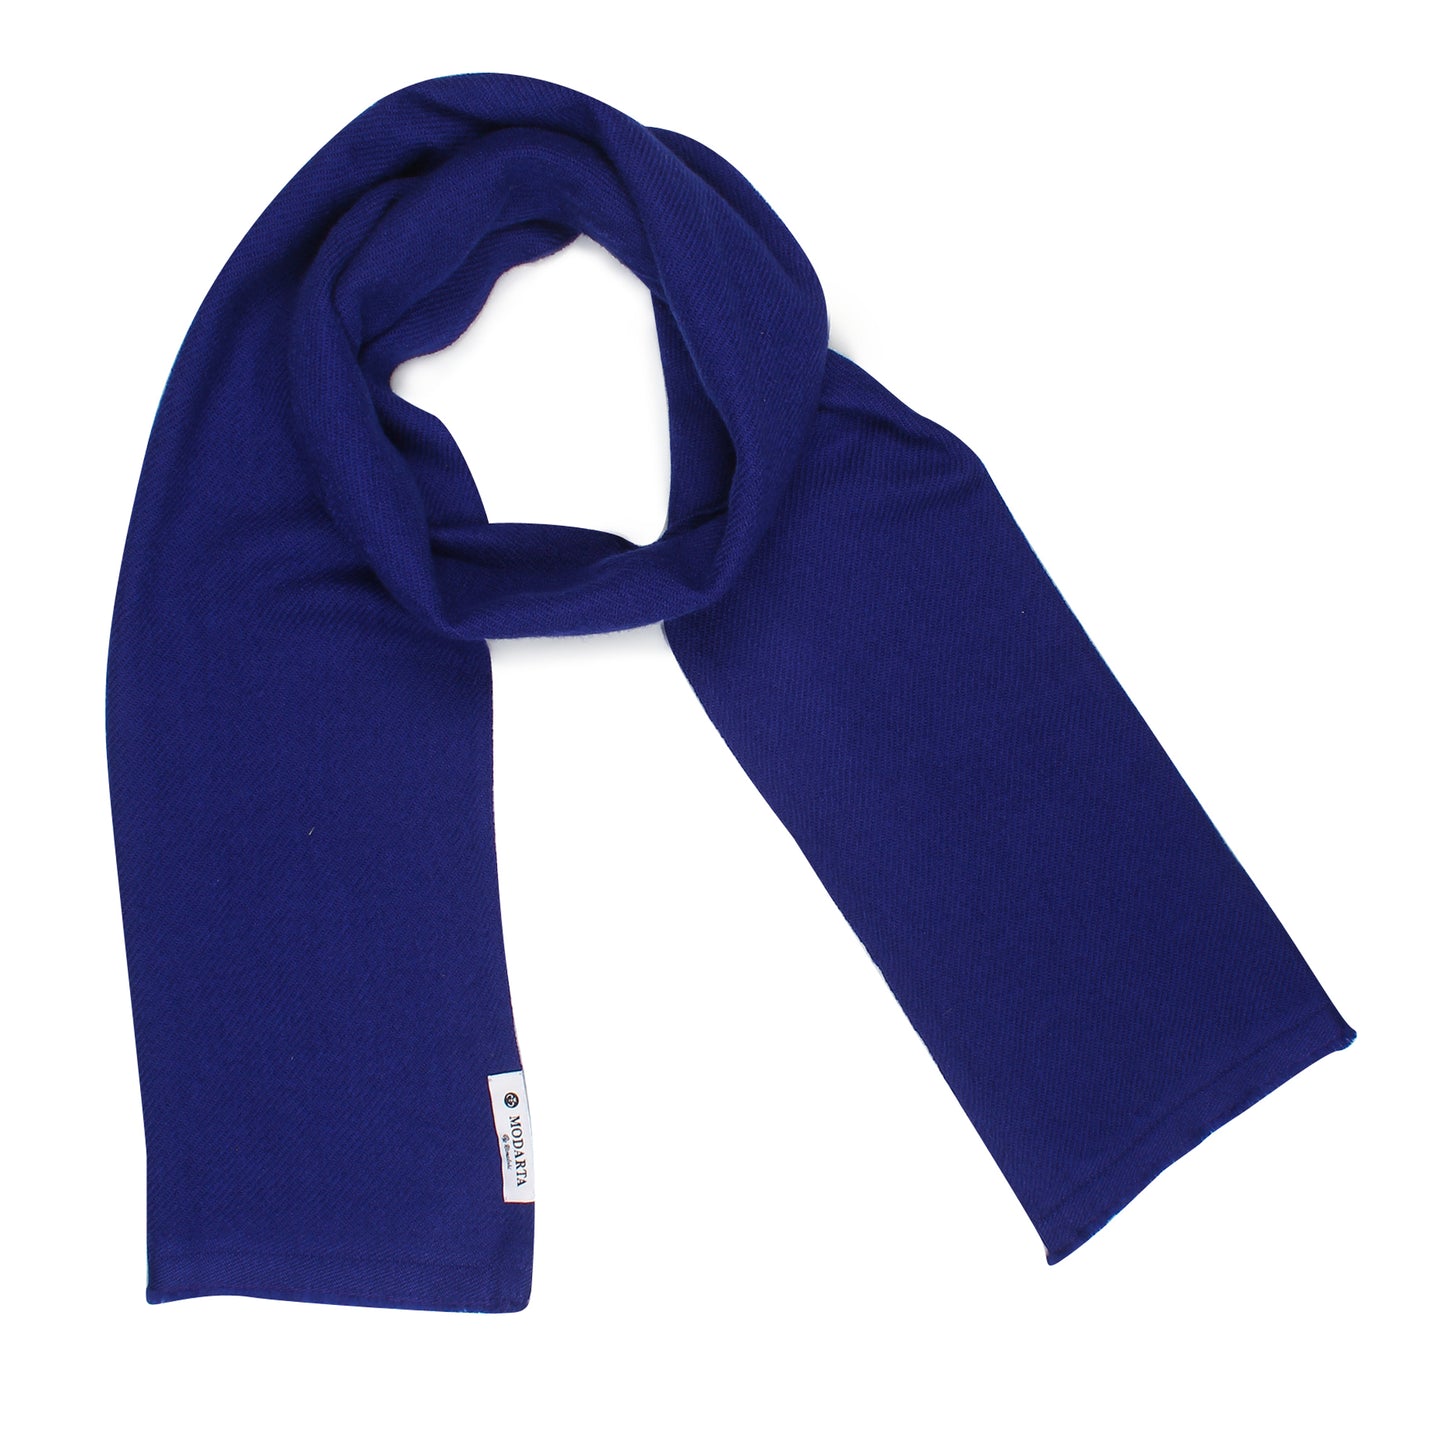 Mens neck scarf with suit